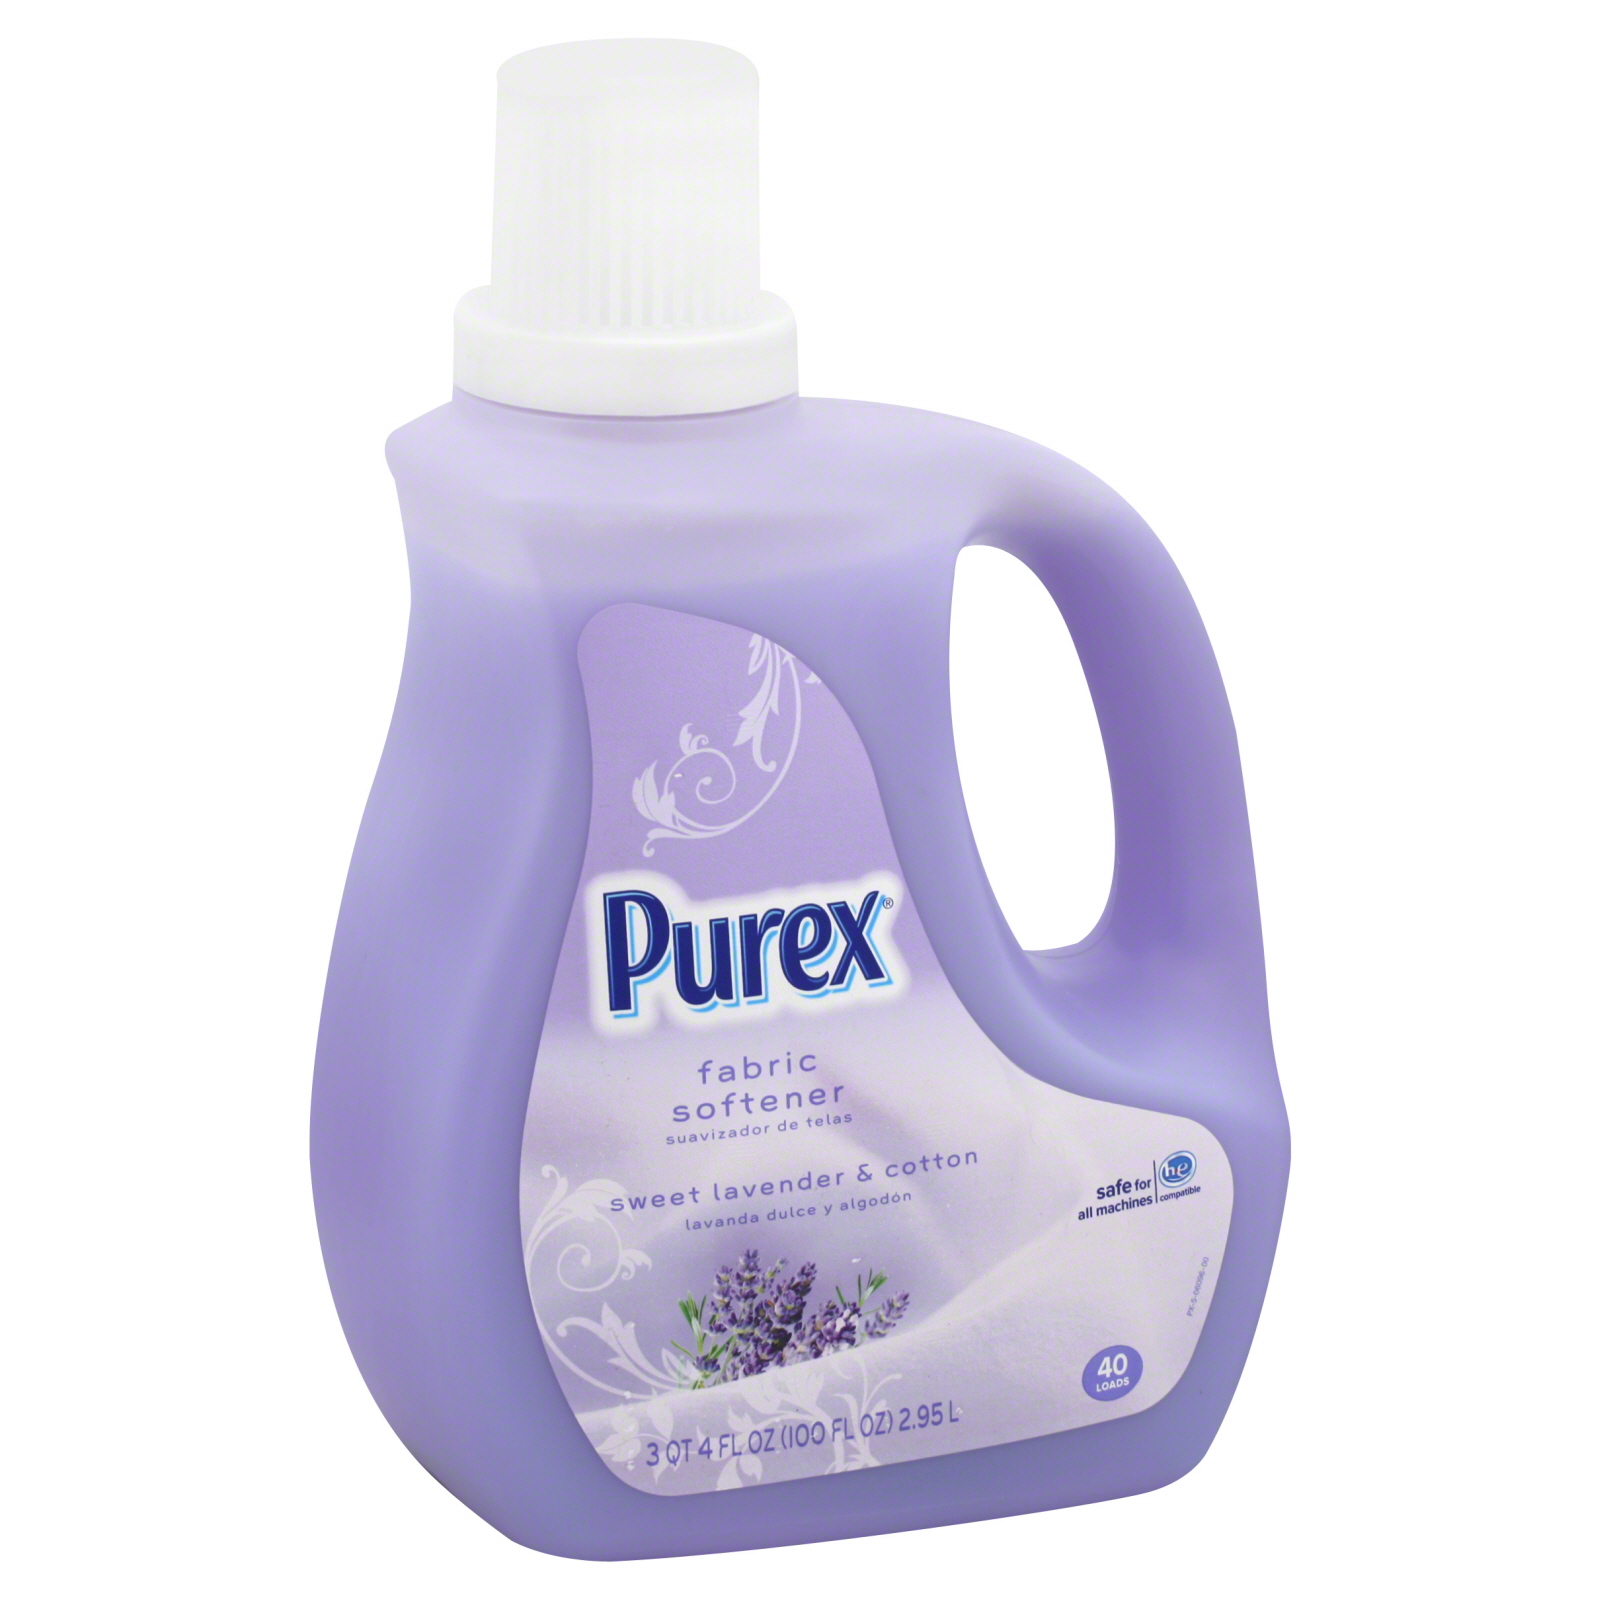 Xtra Detergent, 2X Concentrated, with the Softness of Escape Fabric Softener, Lavender & Sweet Vanilla, 175 fl oz (1.36 gl) 5.17 lt   Food & Grocery   Laundry Care   Detergents